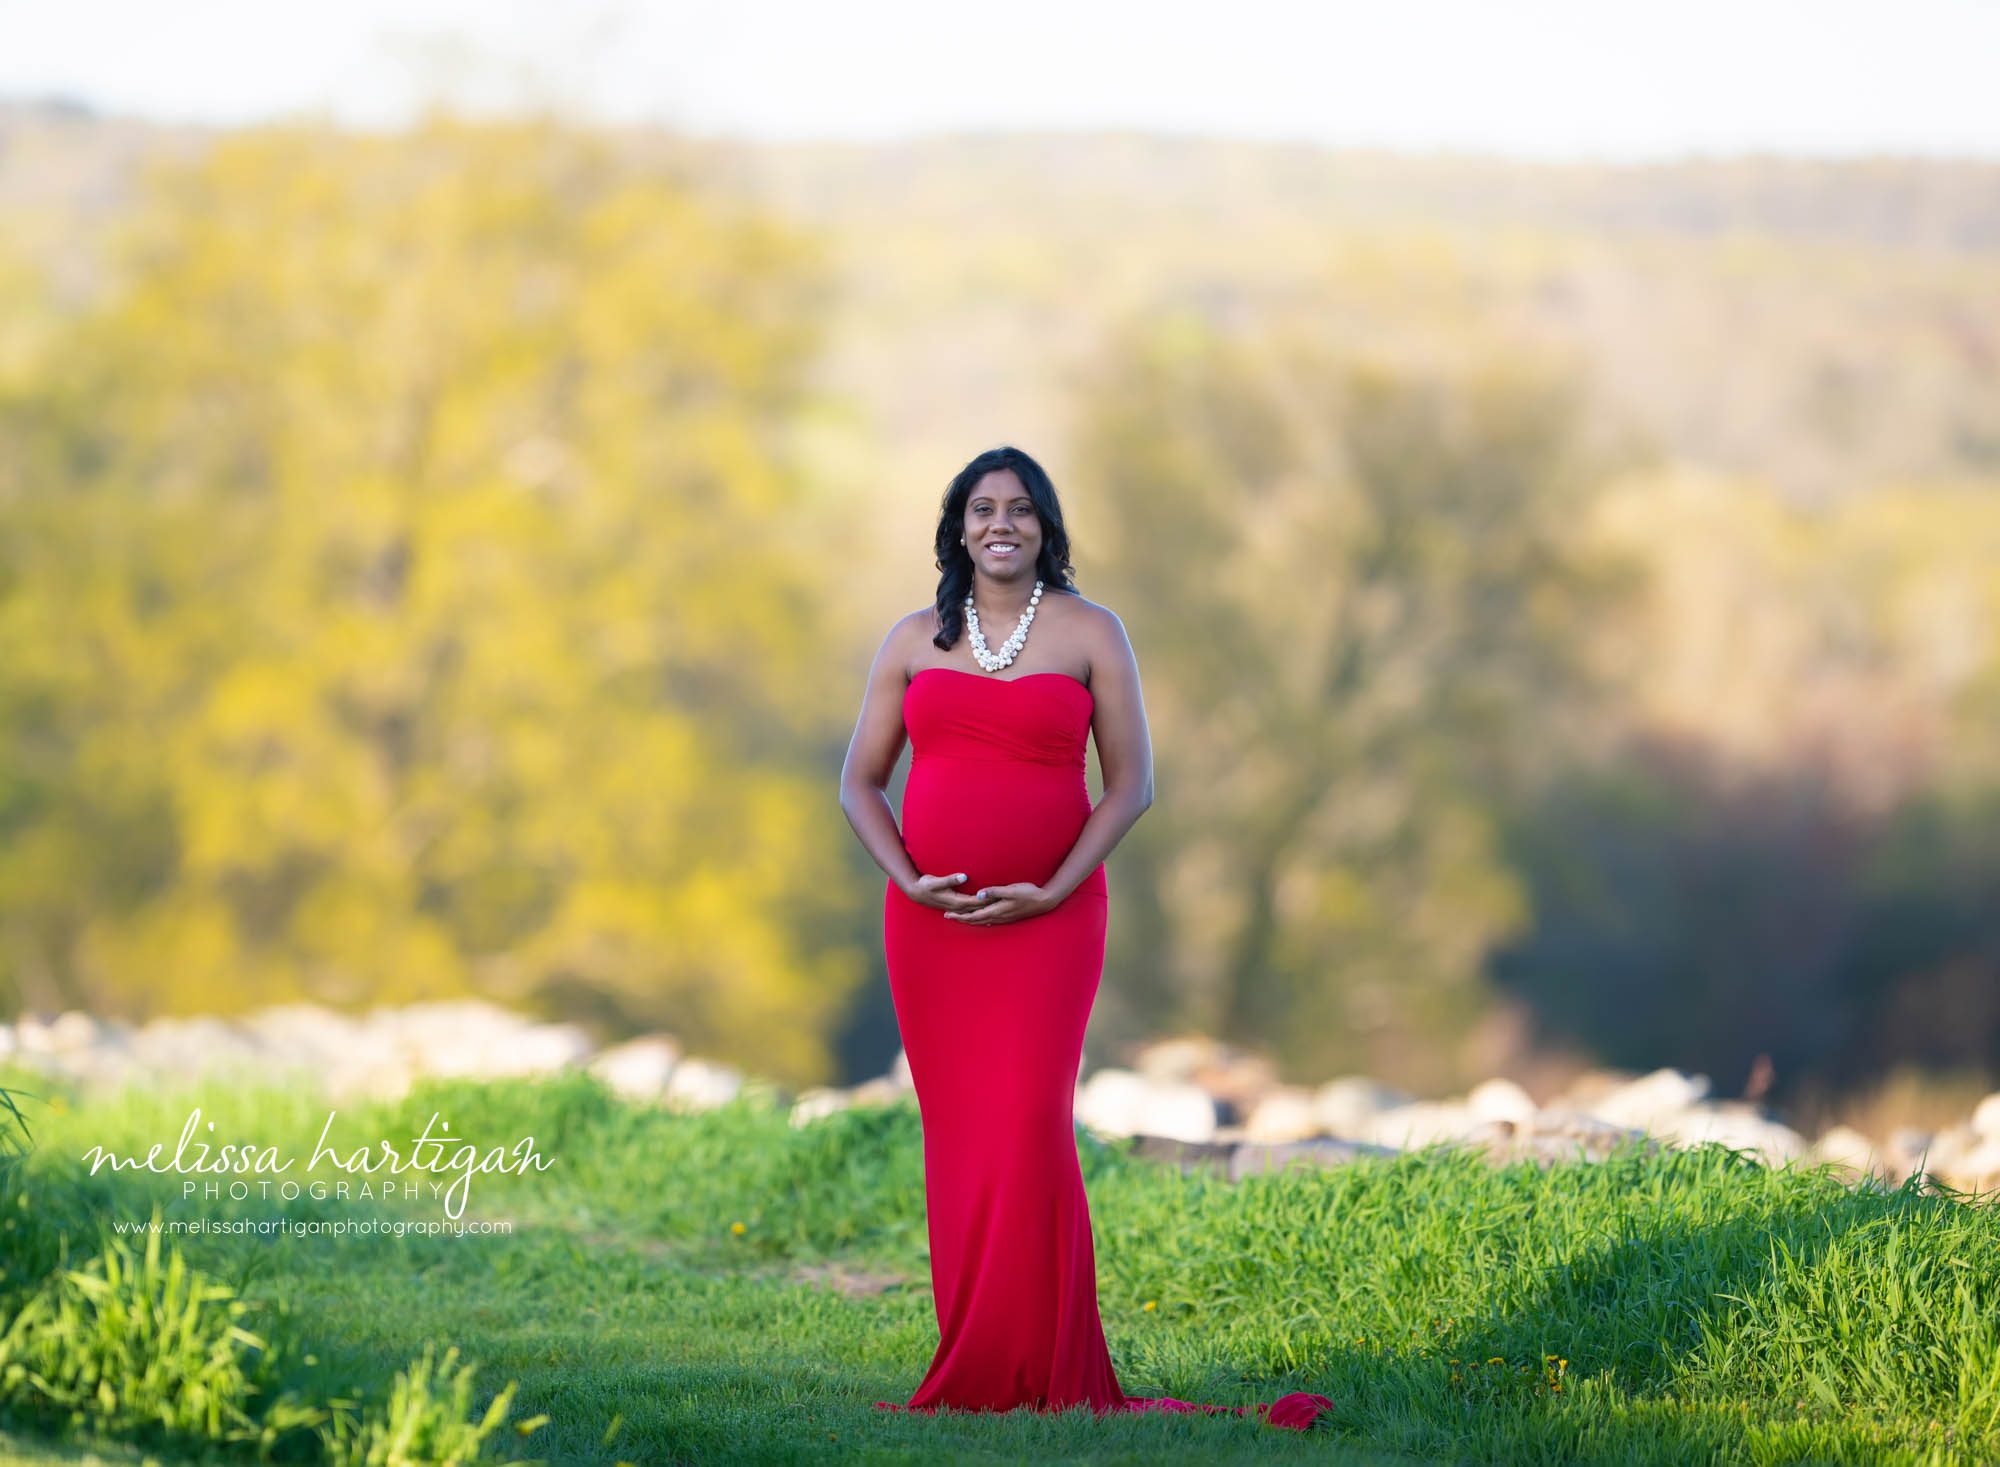 Pregnant mom standing maternity photography pose wearing long fitting red dress